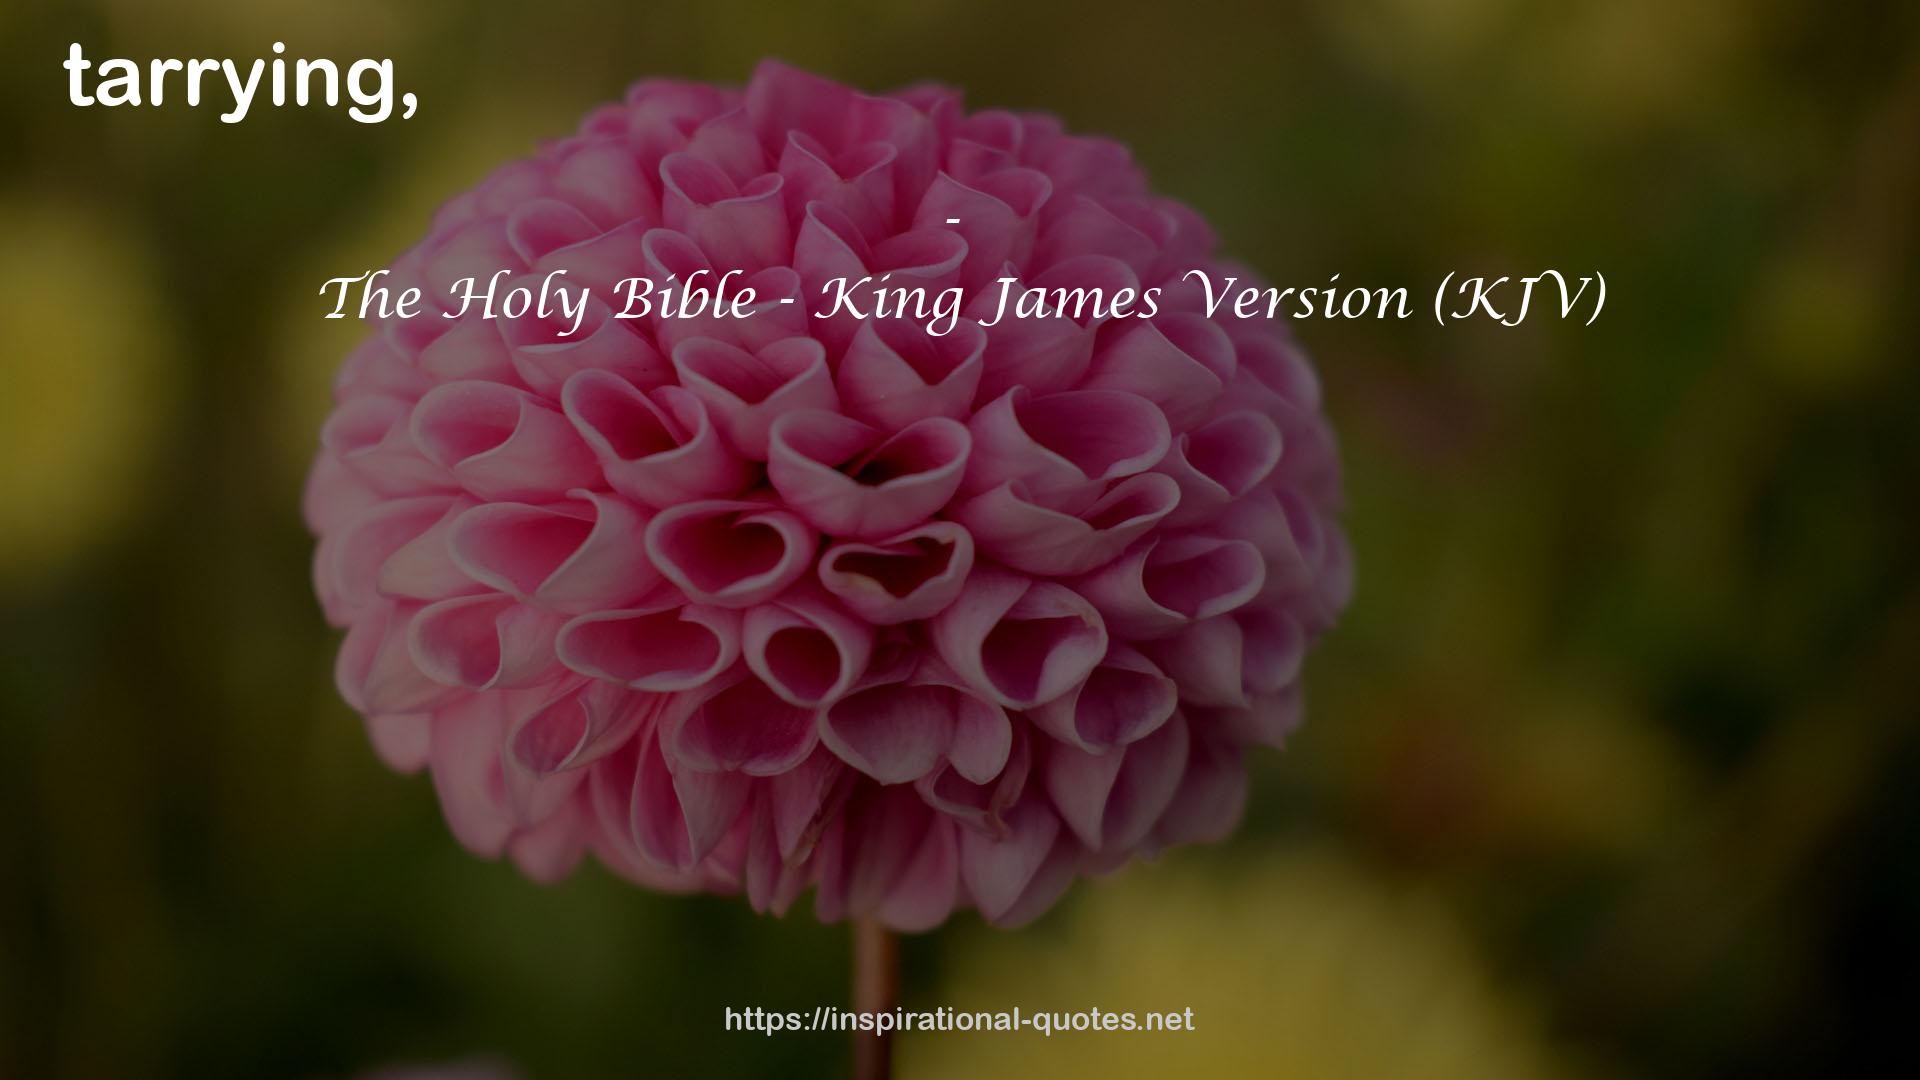 The Holy Bible - King James Version (KJV) QUOTES